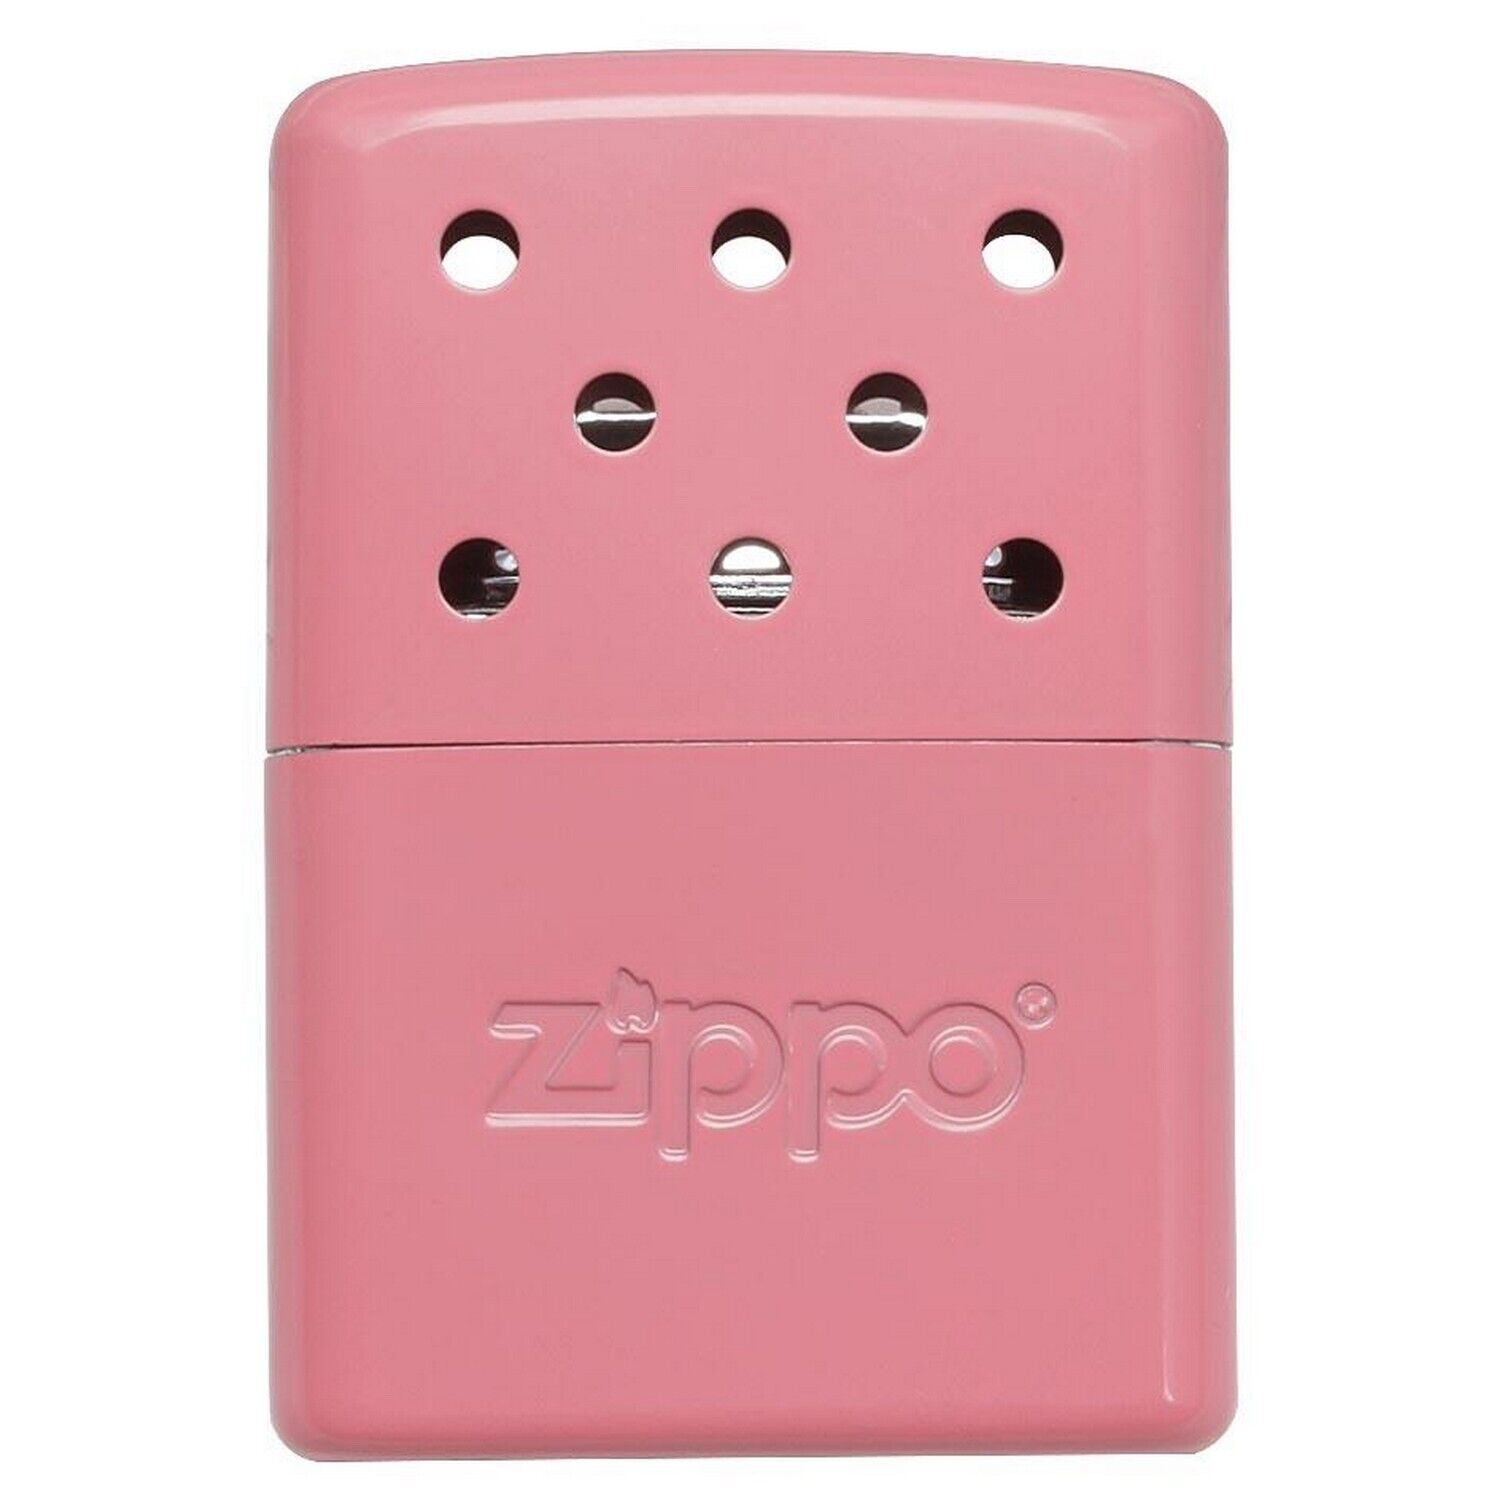 Zippo 6-hour Pink Refillable Hand Warmer, 40473_rb